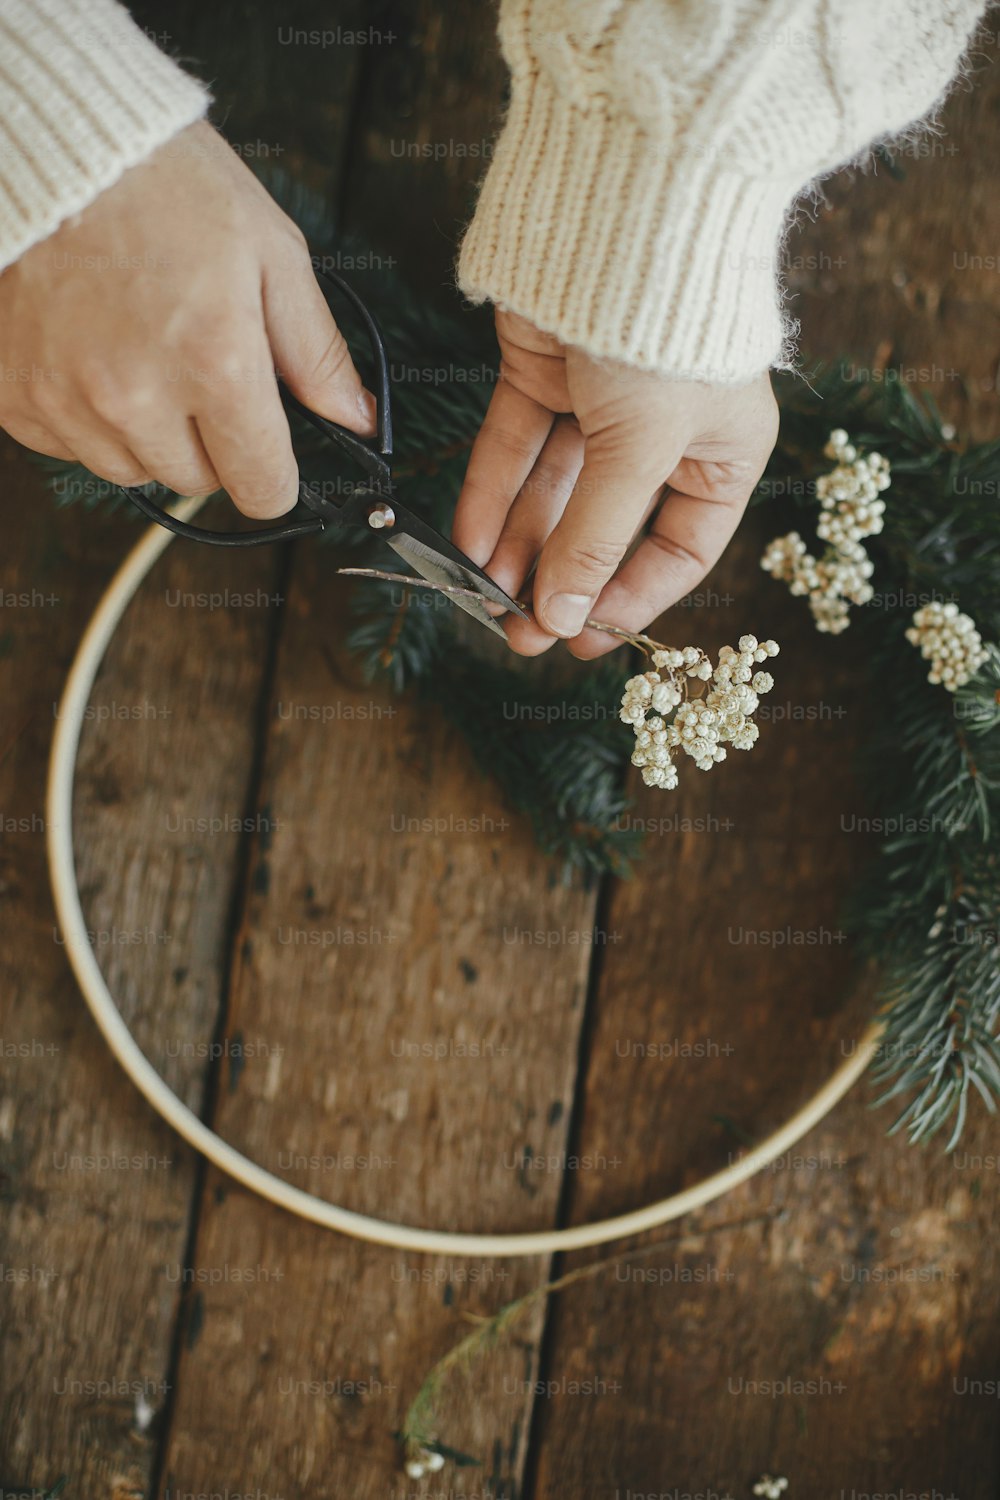 Hands in cozy sweater cutting herb with scissors for modern boho wreath with fir branches and wooden hoop on rustic table. Atmospheric moody image. Making stylish christmas wreath